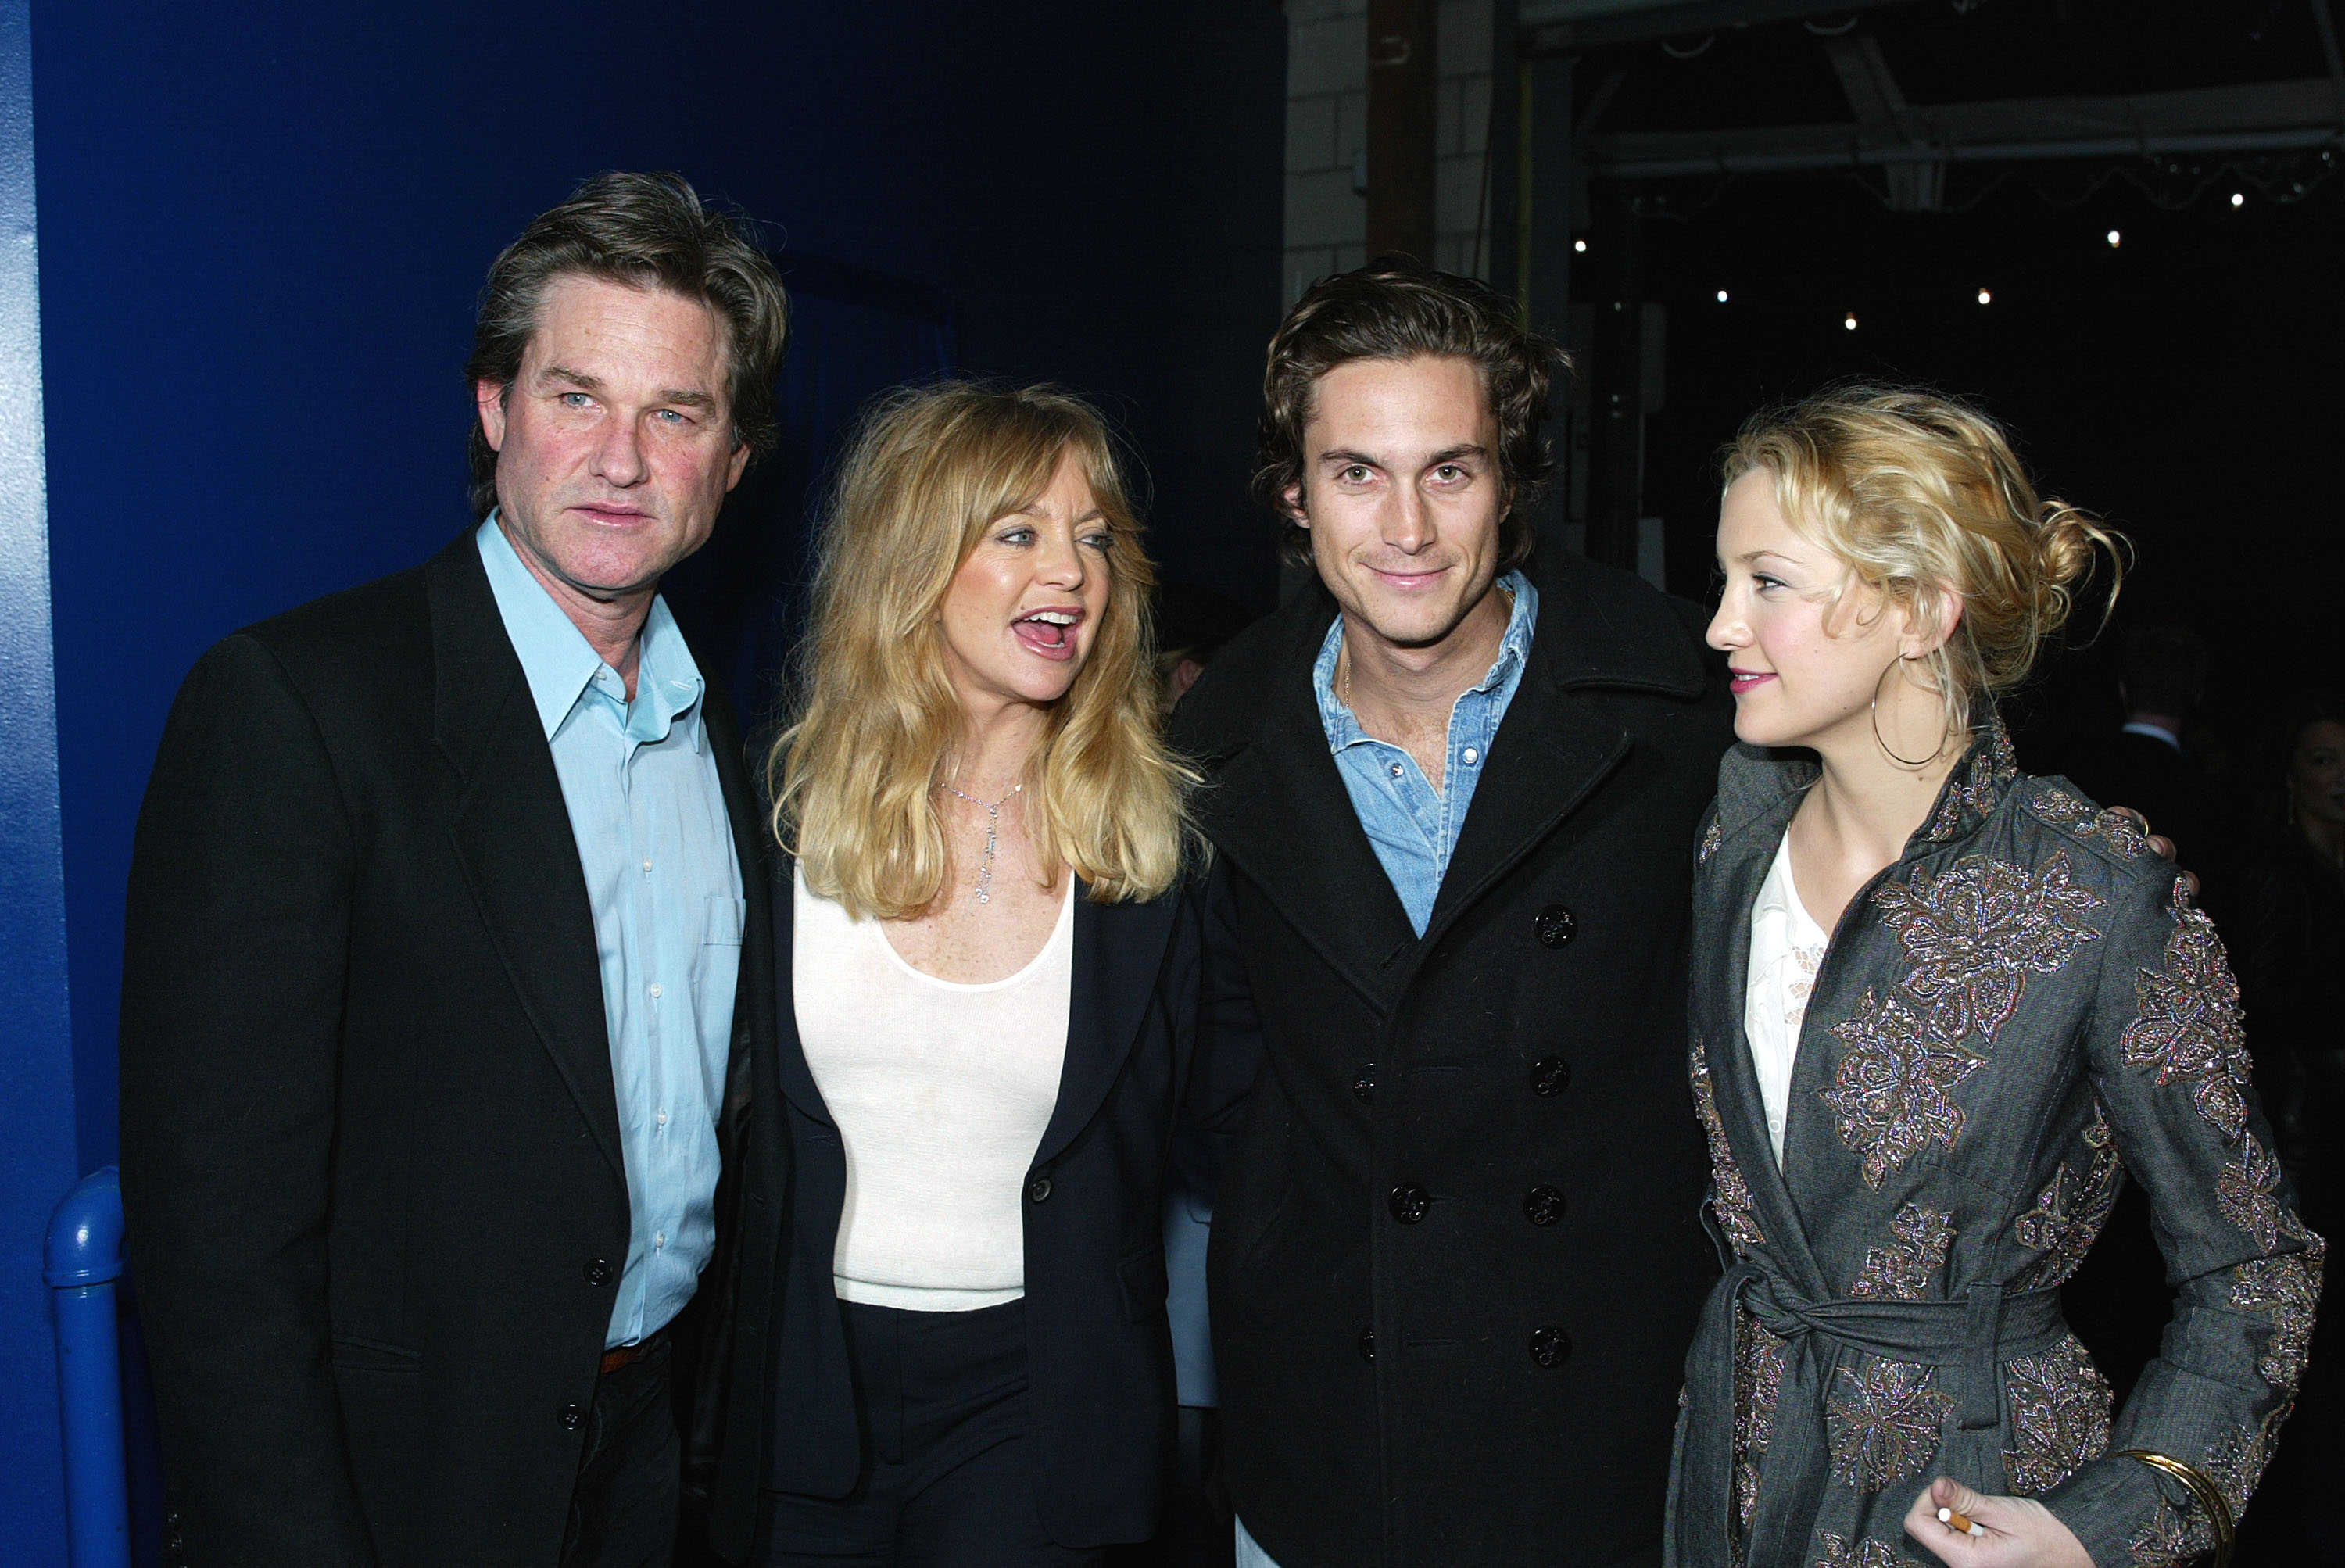 Kurt Russell, Goldie Hawn, Oliver and Kate Hudson at the "Dark Blue" premiere party in Los Angeles in 2003 | Source: Getty Images